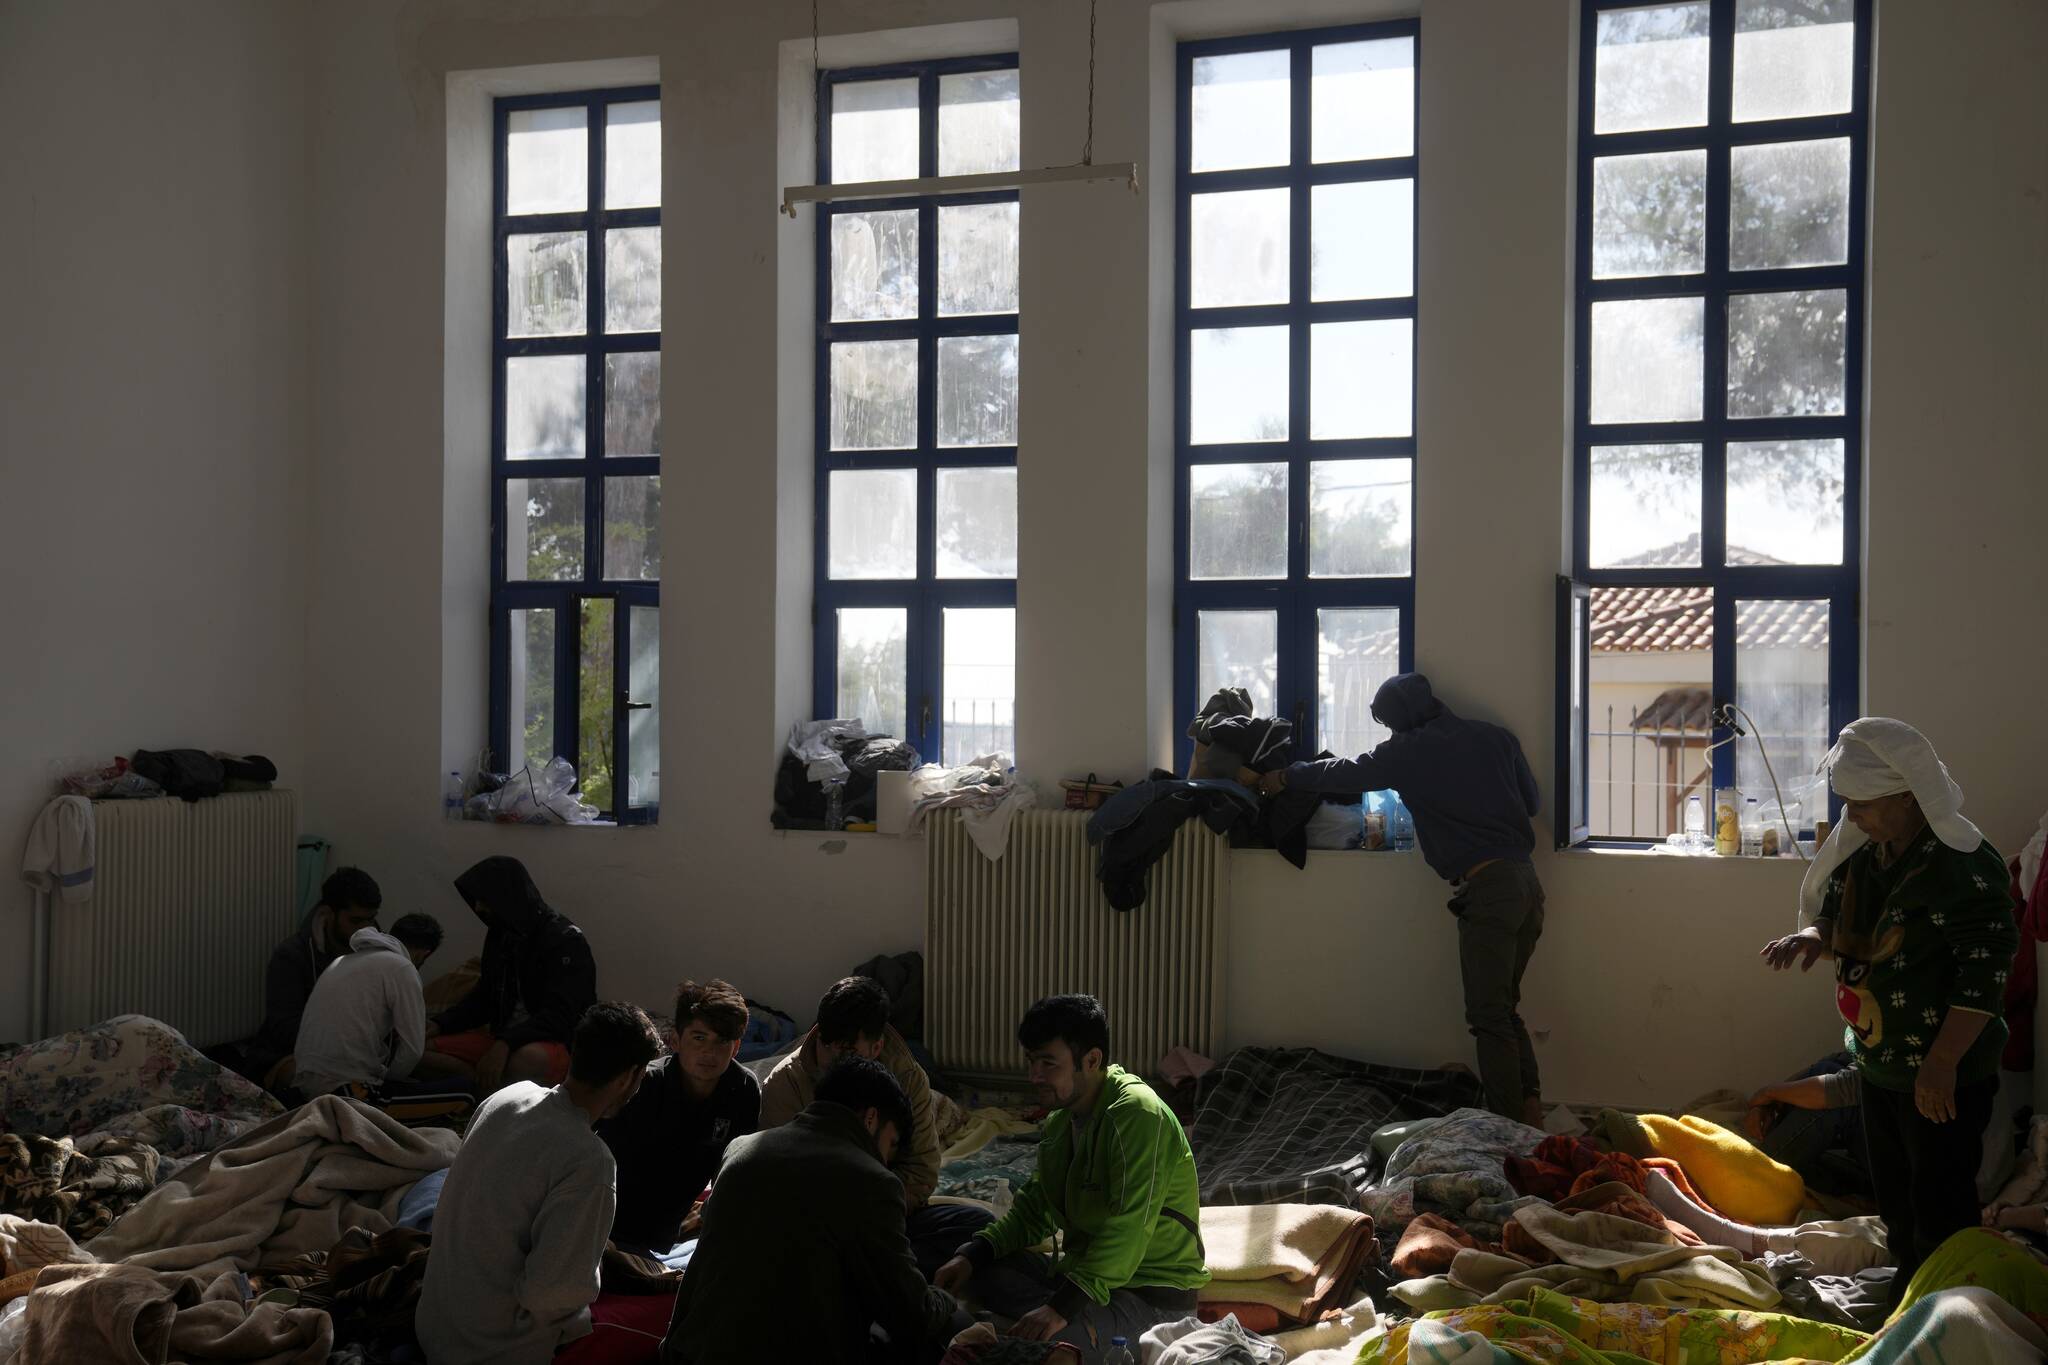 Migrants, most of them from Afghanistan, rest at an old school used as a temporary shelter on the island of Kythira, southern Greece, Friday, Oct. 7, 2022. (AP Photo/Thanassis Stavrakis)